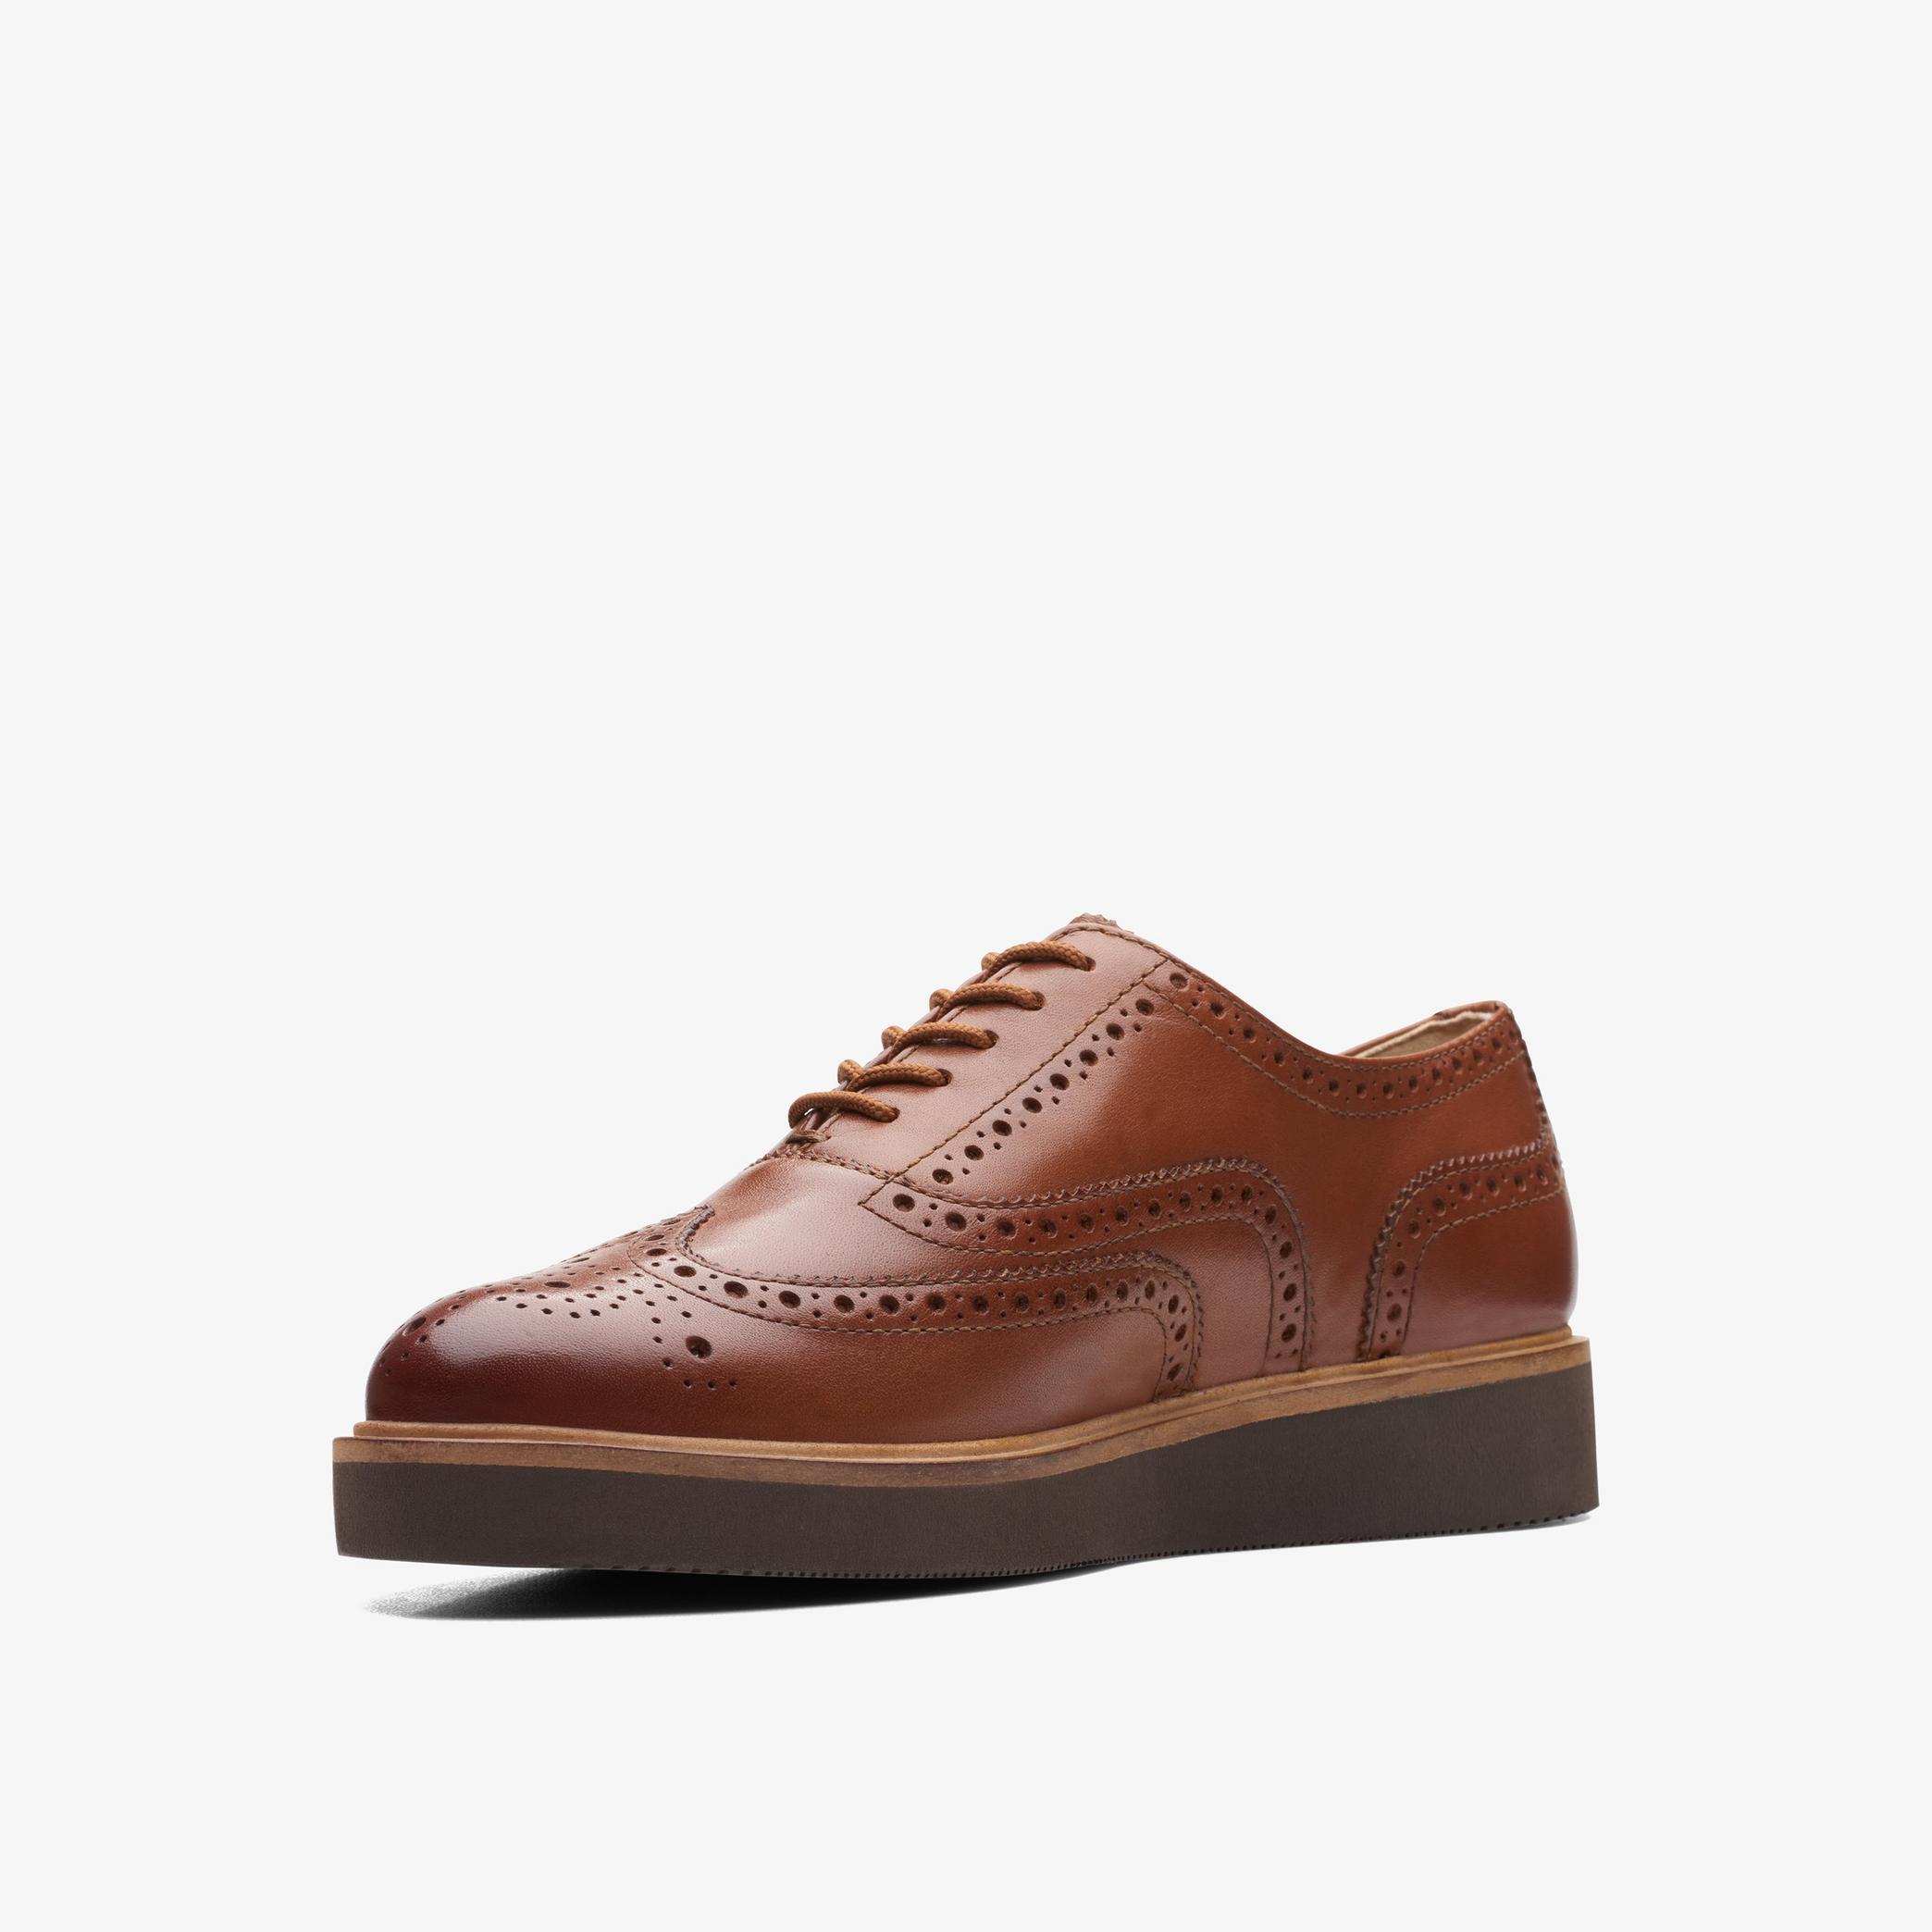 Glickly Brogue Dark Tan Leather Brogues, view 4 of 6